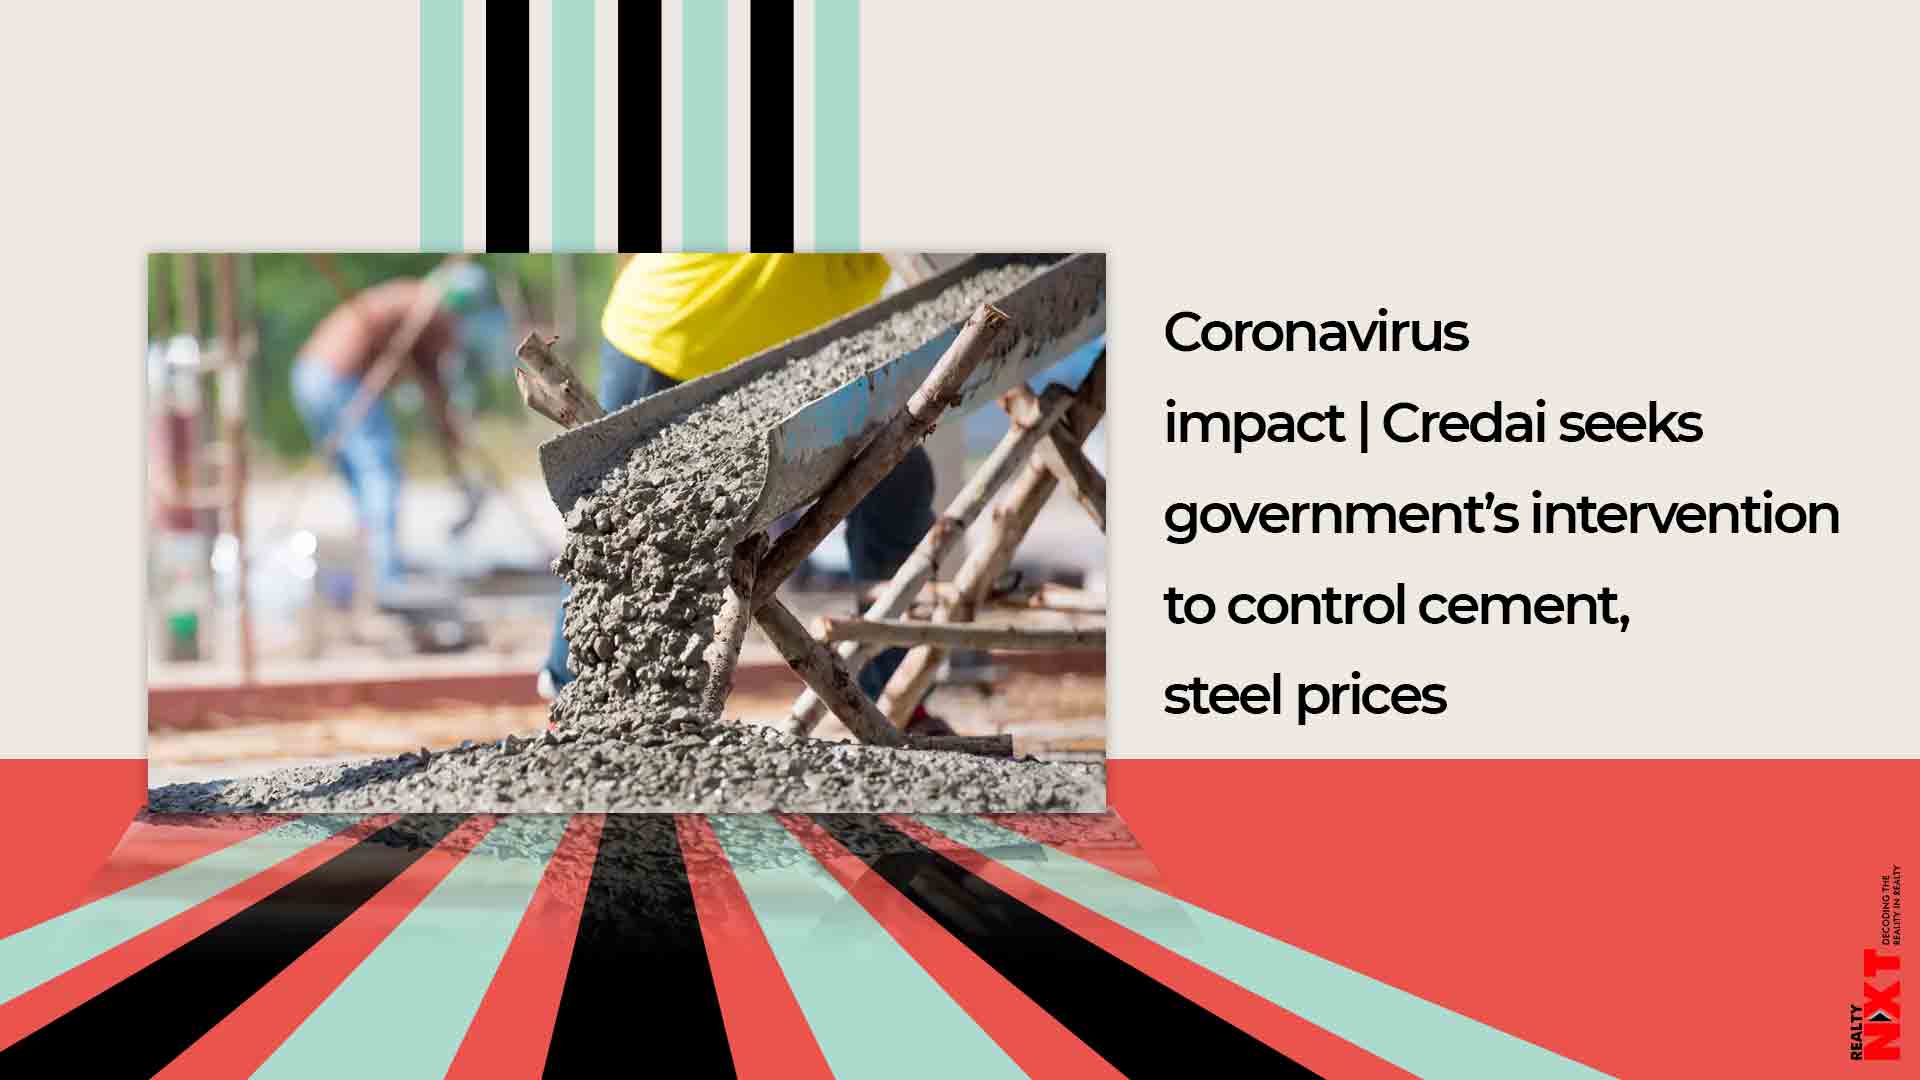 Telugu Business News Roundup Today - Cement Prices Hiked In India